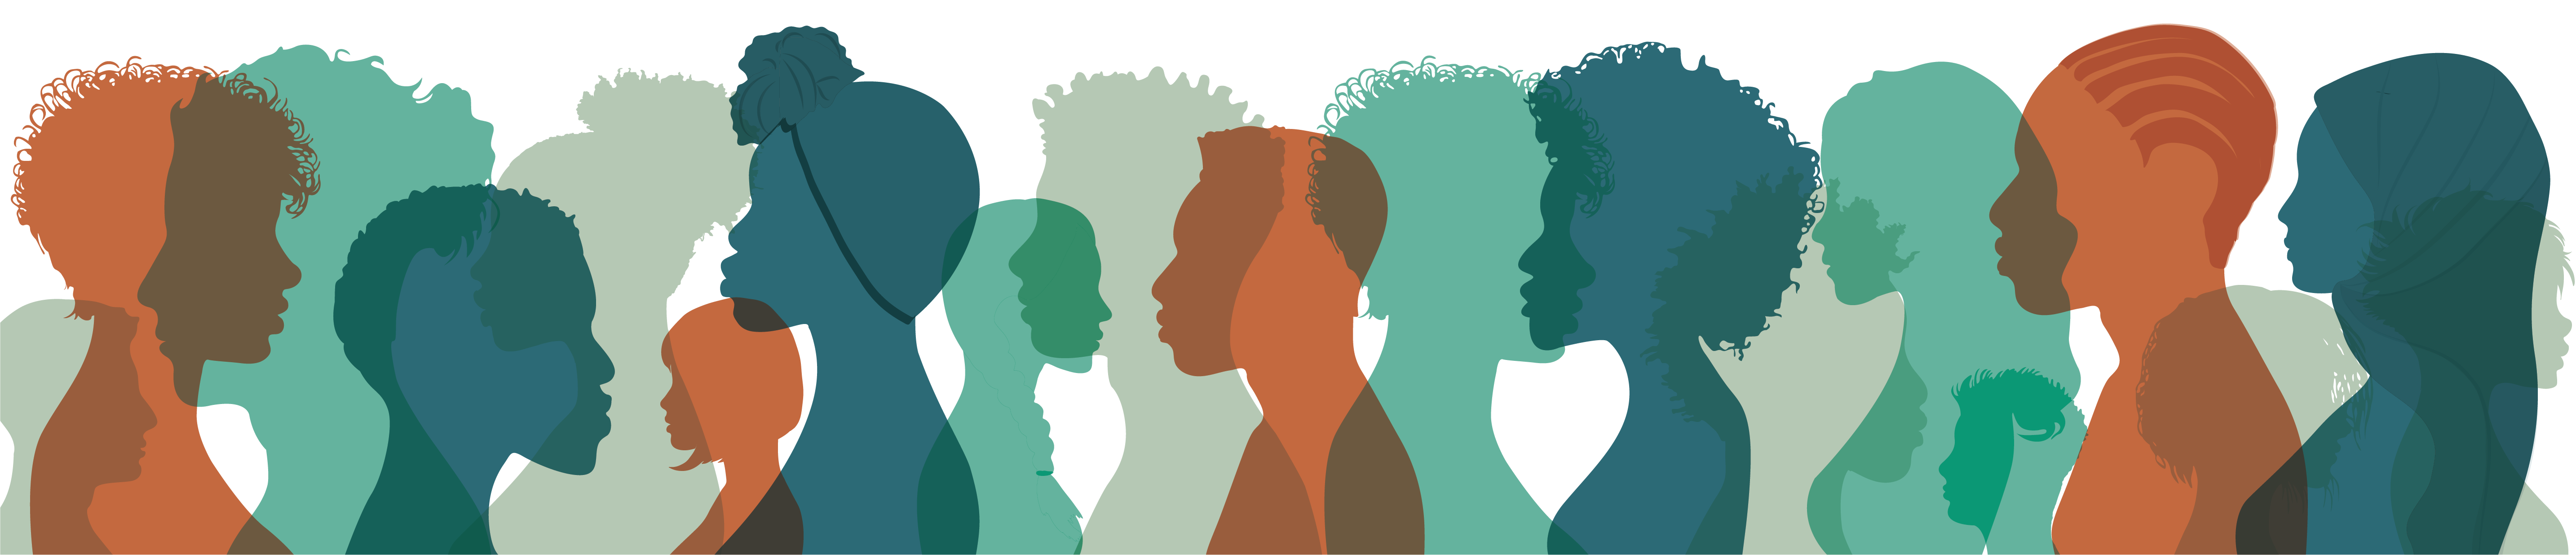 Silhouettes of diverse faces